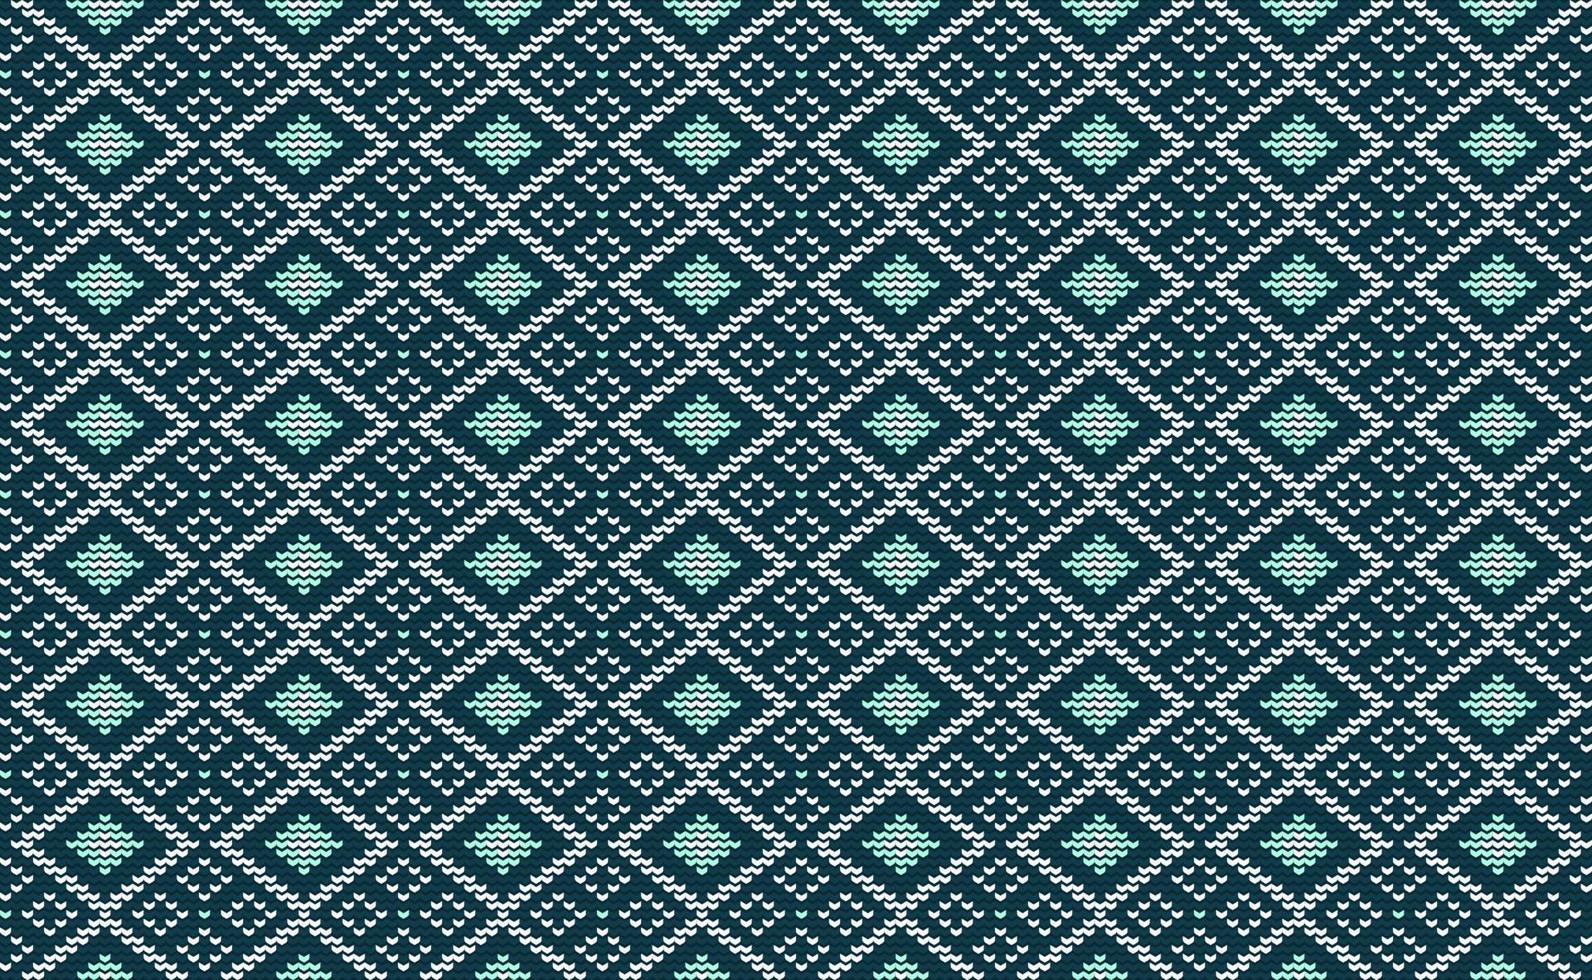 Knitted Pattern Vector, Embroidery Element Background, Geometric Diagonal vintage, Handcraft Endless design vector